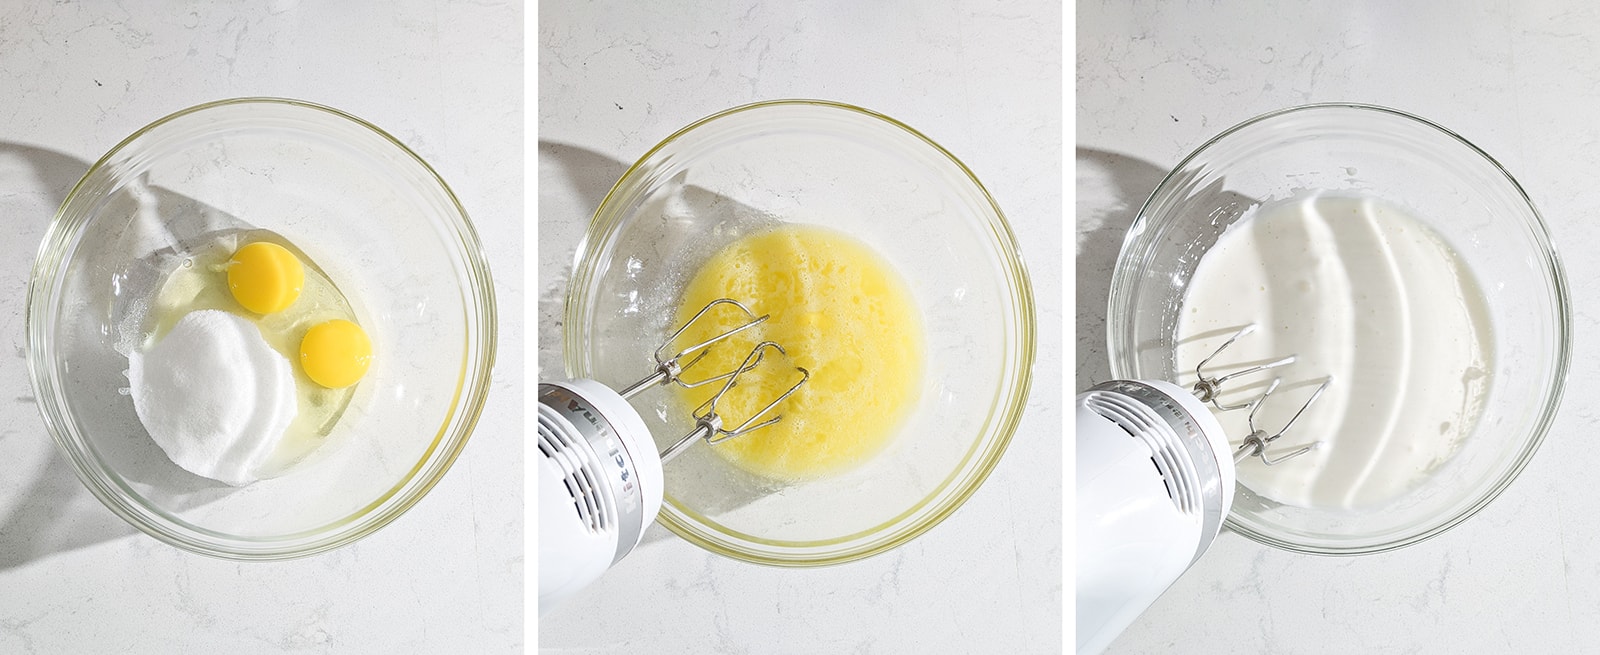 Beating eggs with an electric mixer until pale and fluffy.